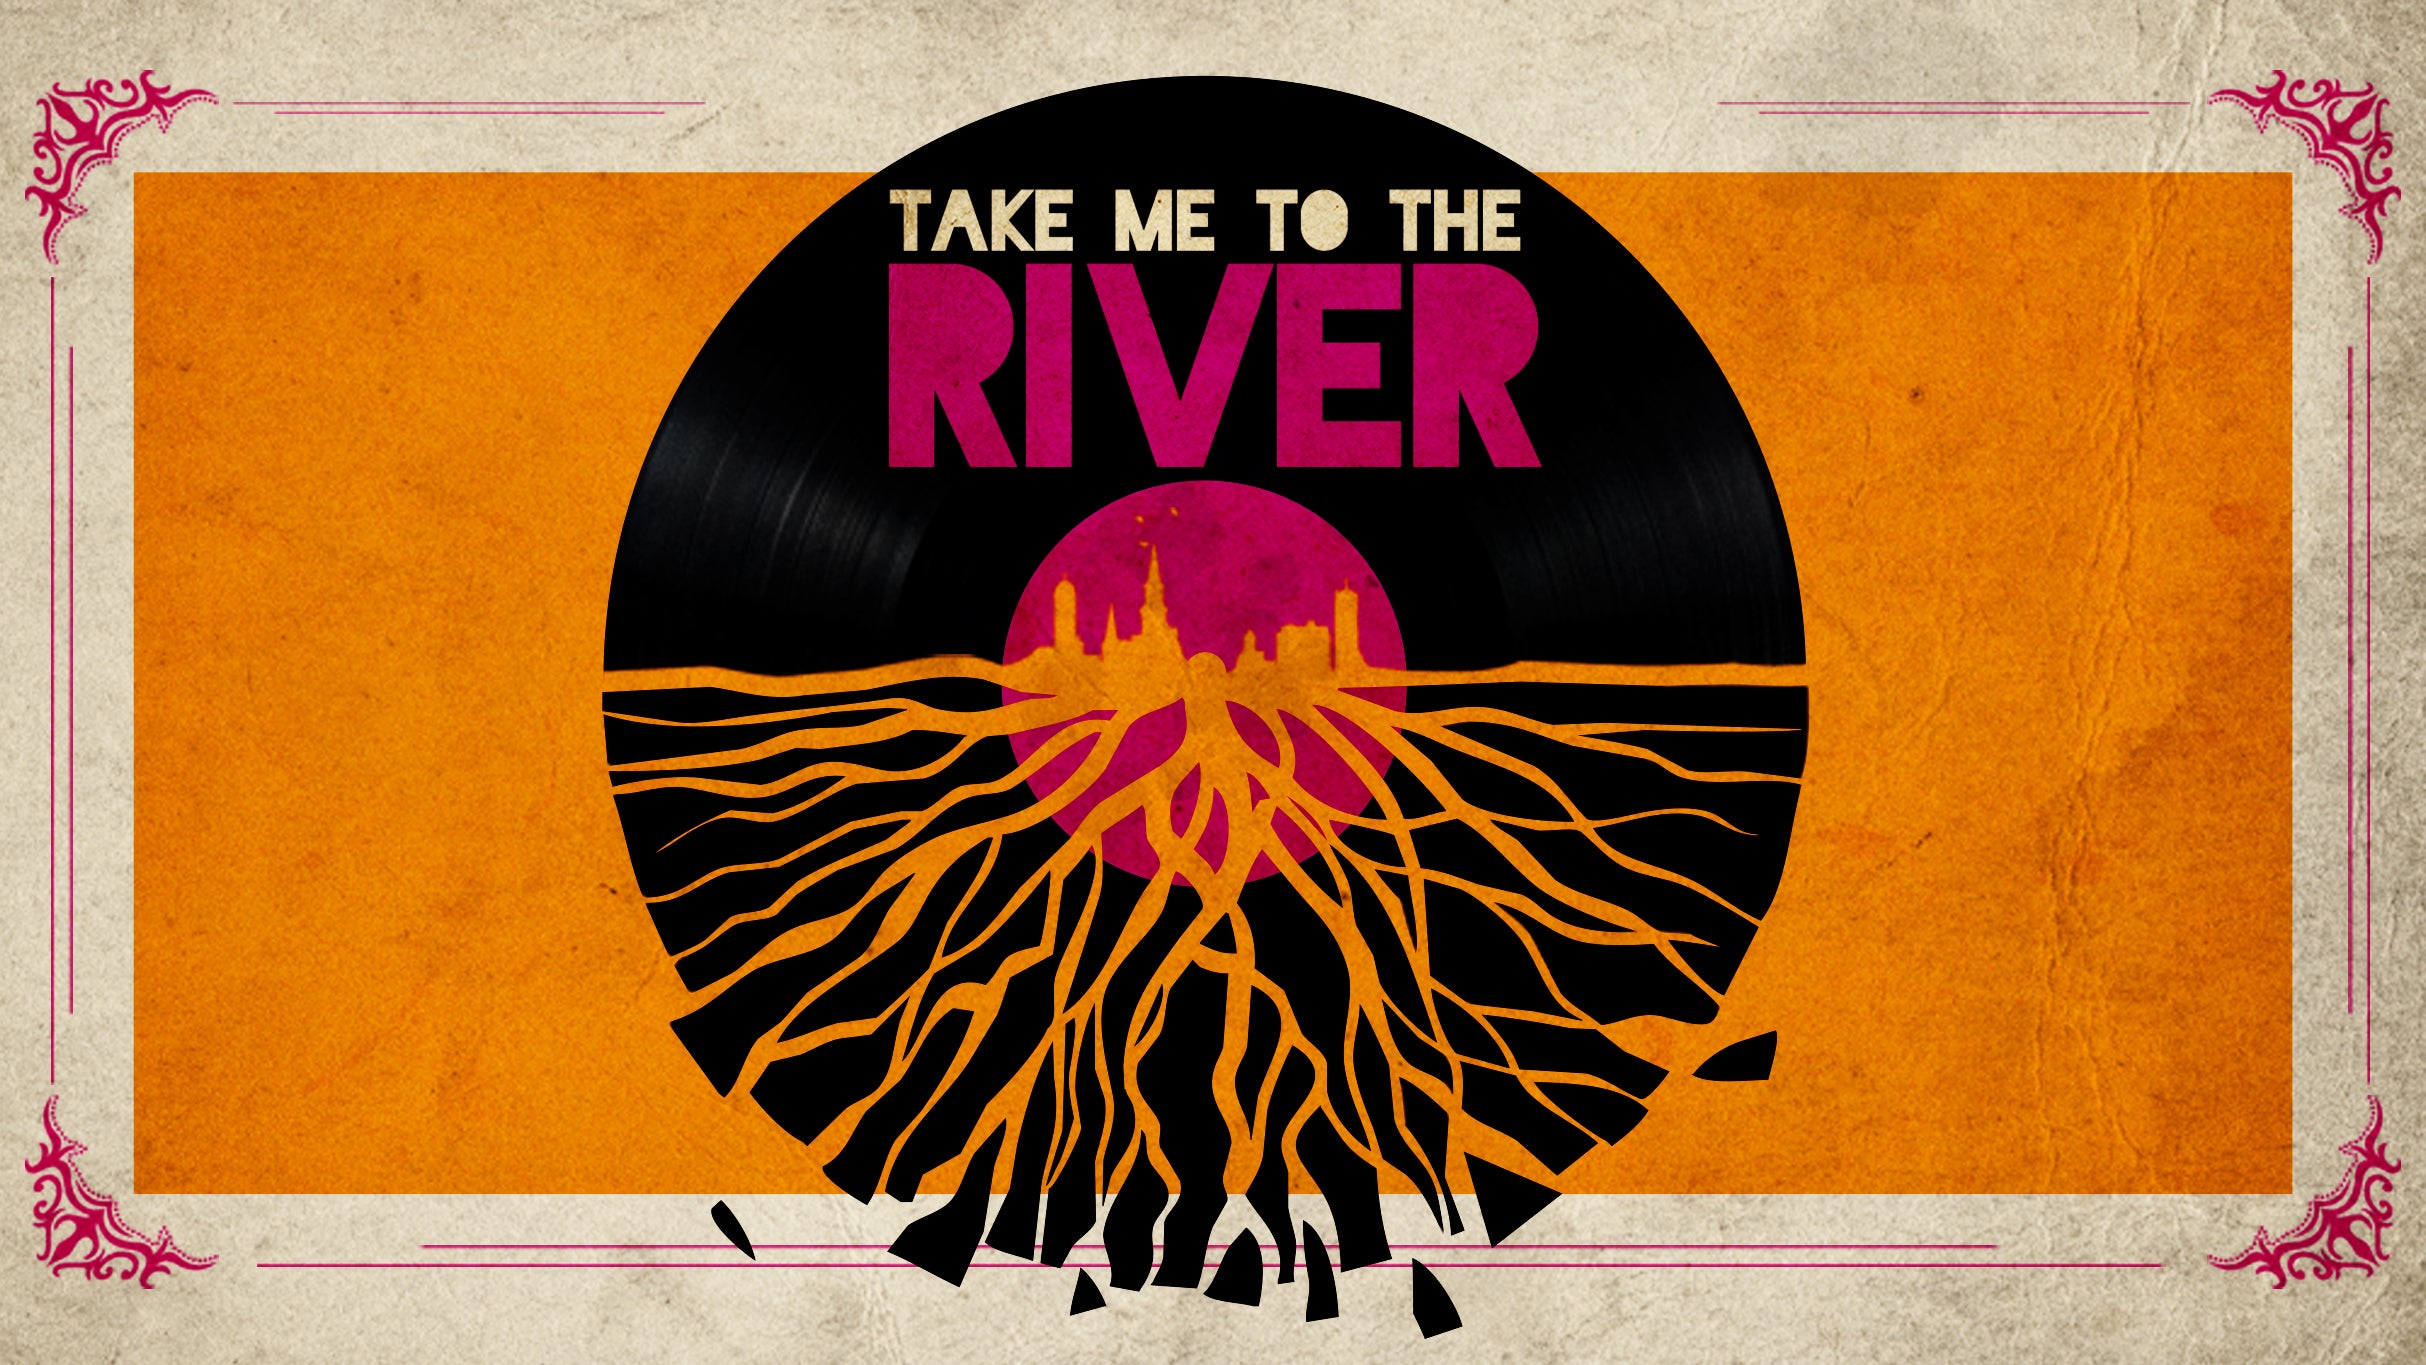 Take Me to the River Concert & Film in Kalamazoo promo photo for Take Me to the River presale offer code